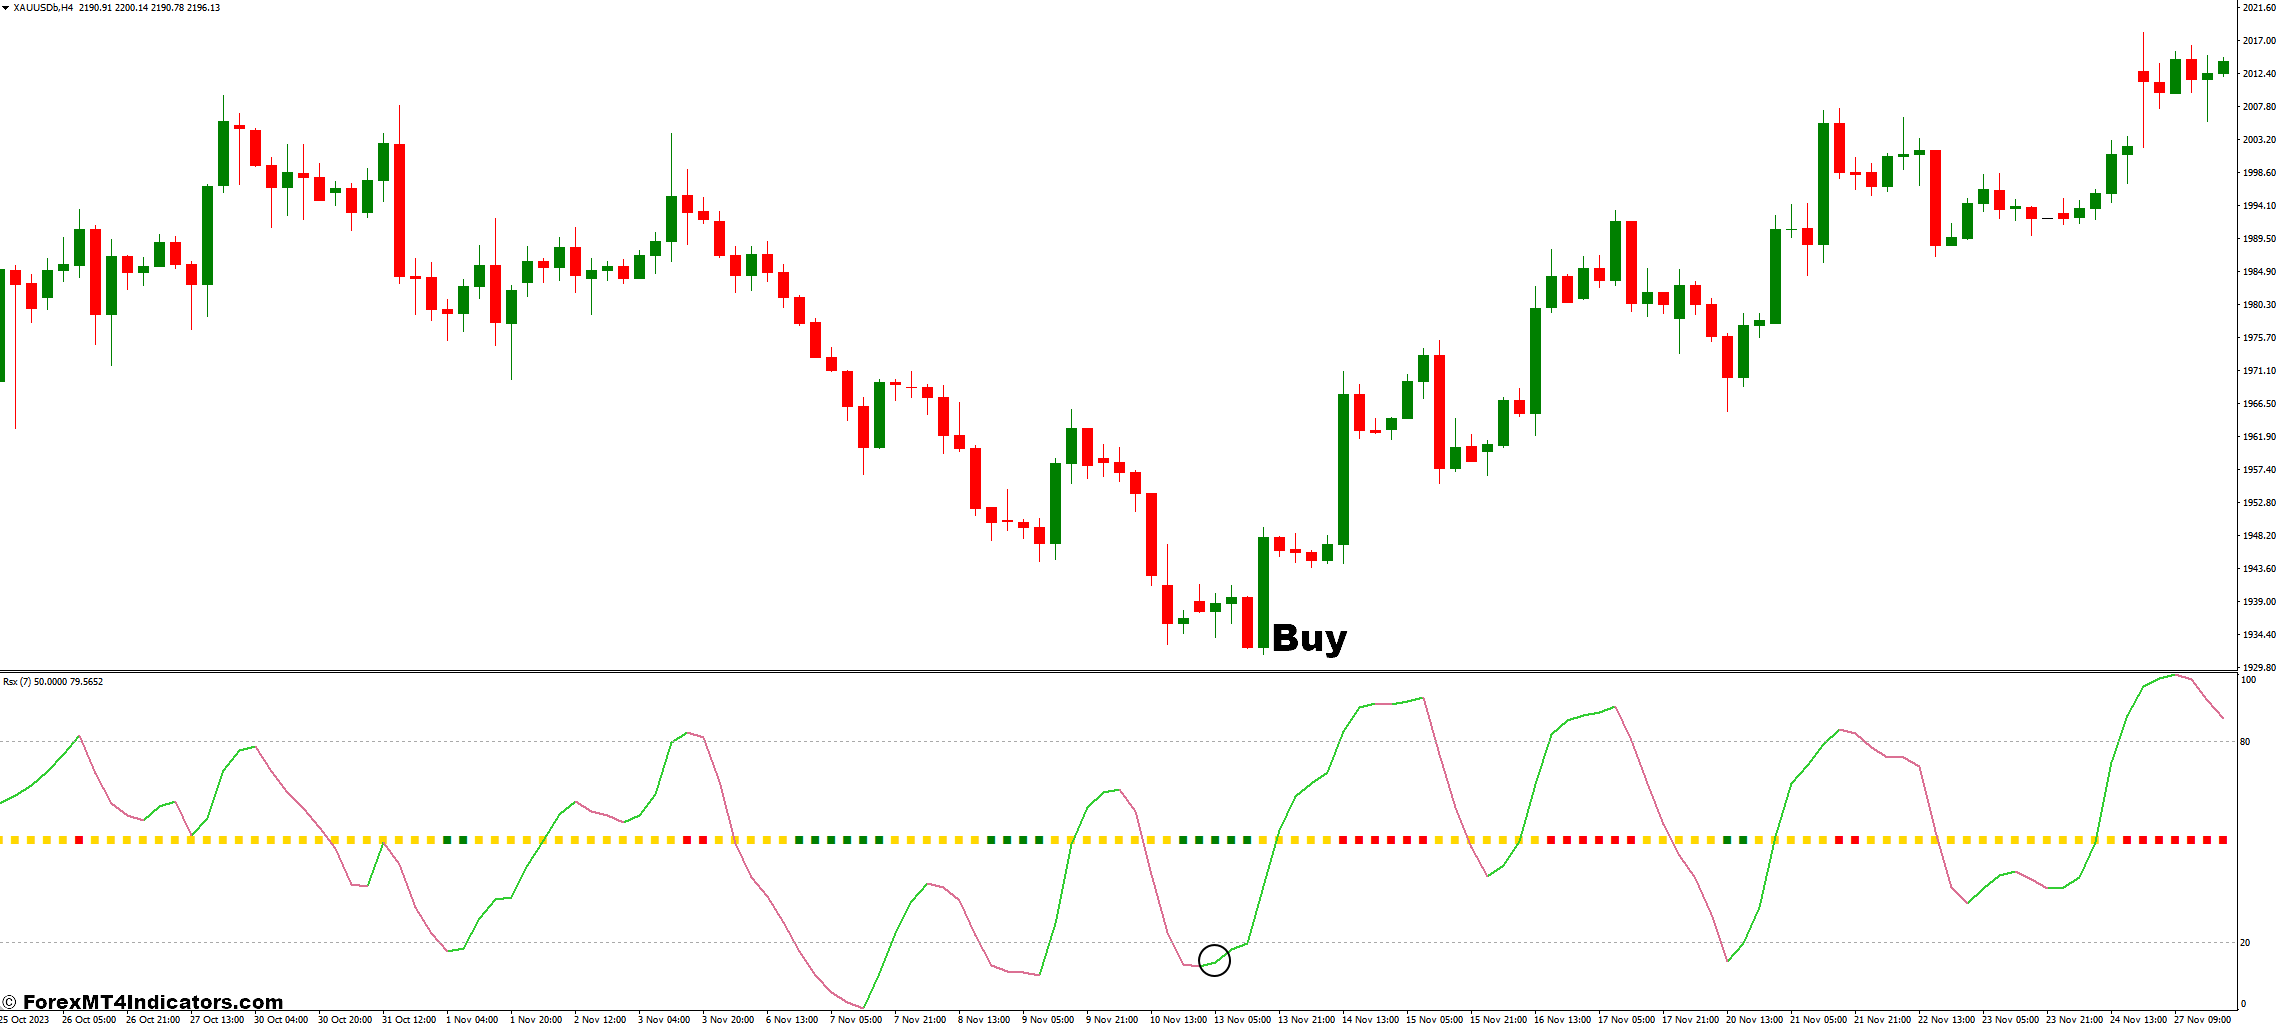 How to Trade with RSX Indicator - Buy Entry